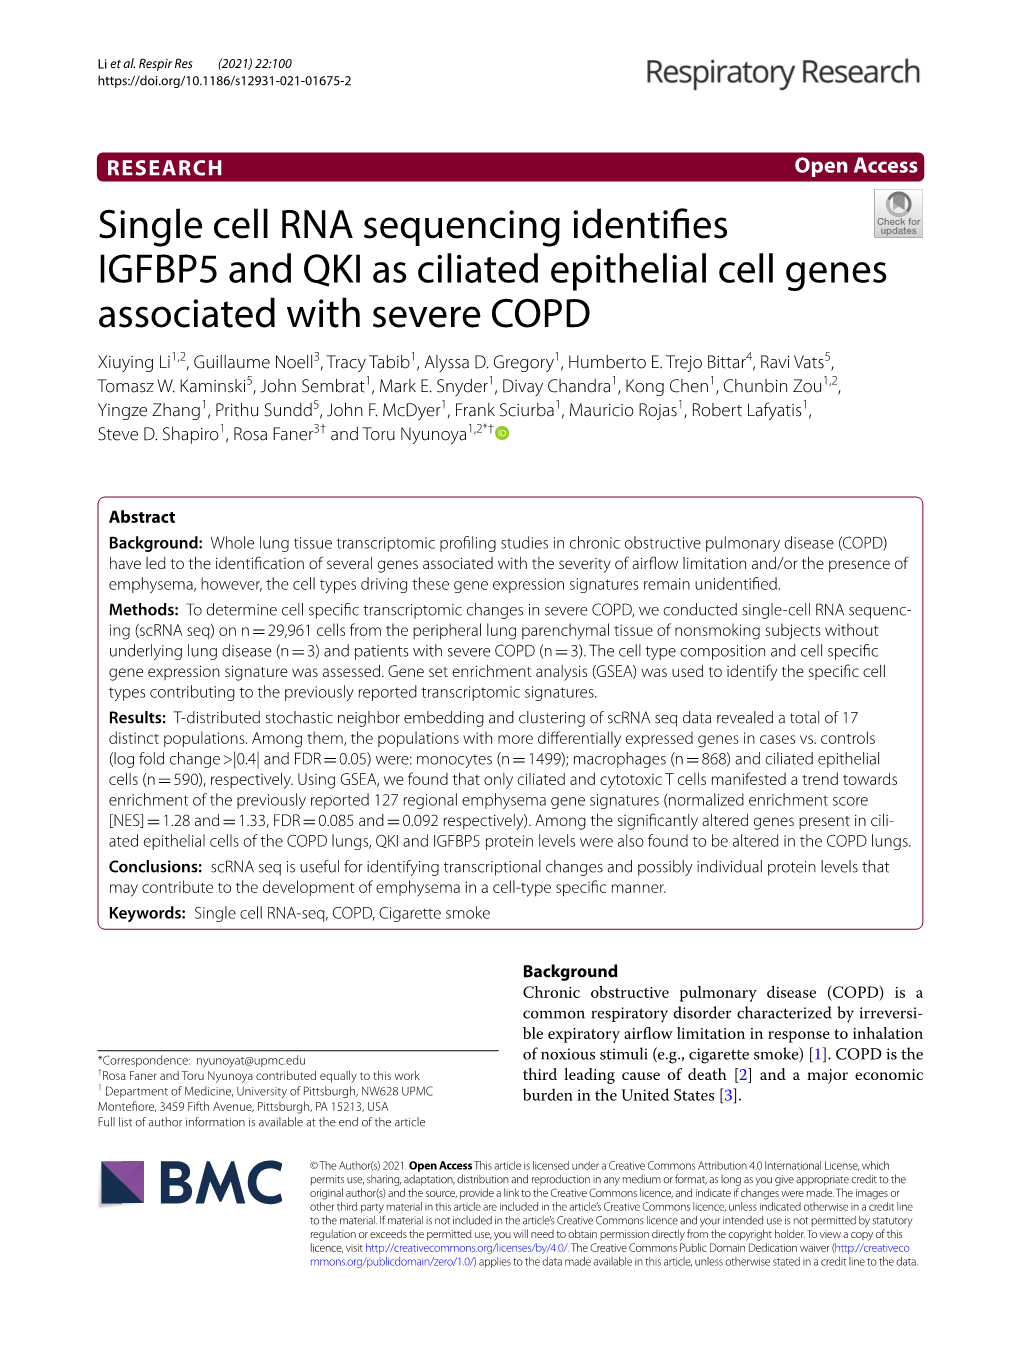 Single Cell RNA Sequencing Identifies IGFBP5 and QKI As Ciliated